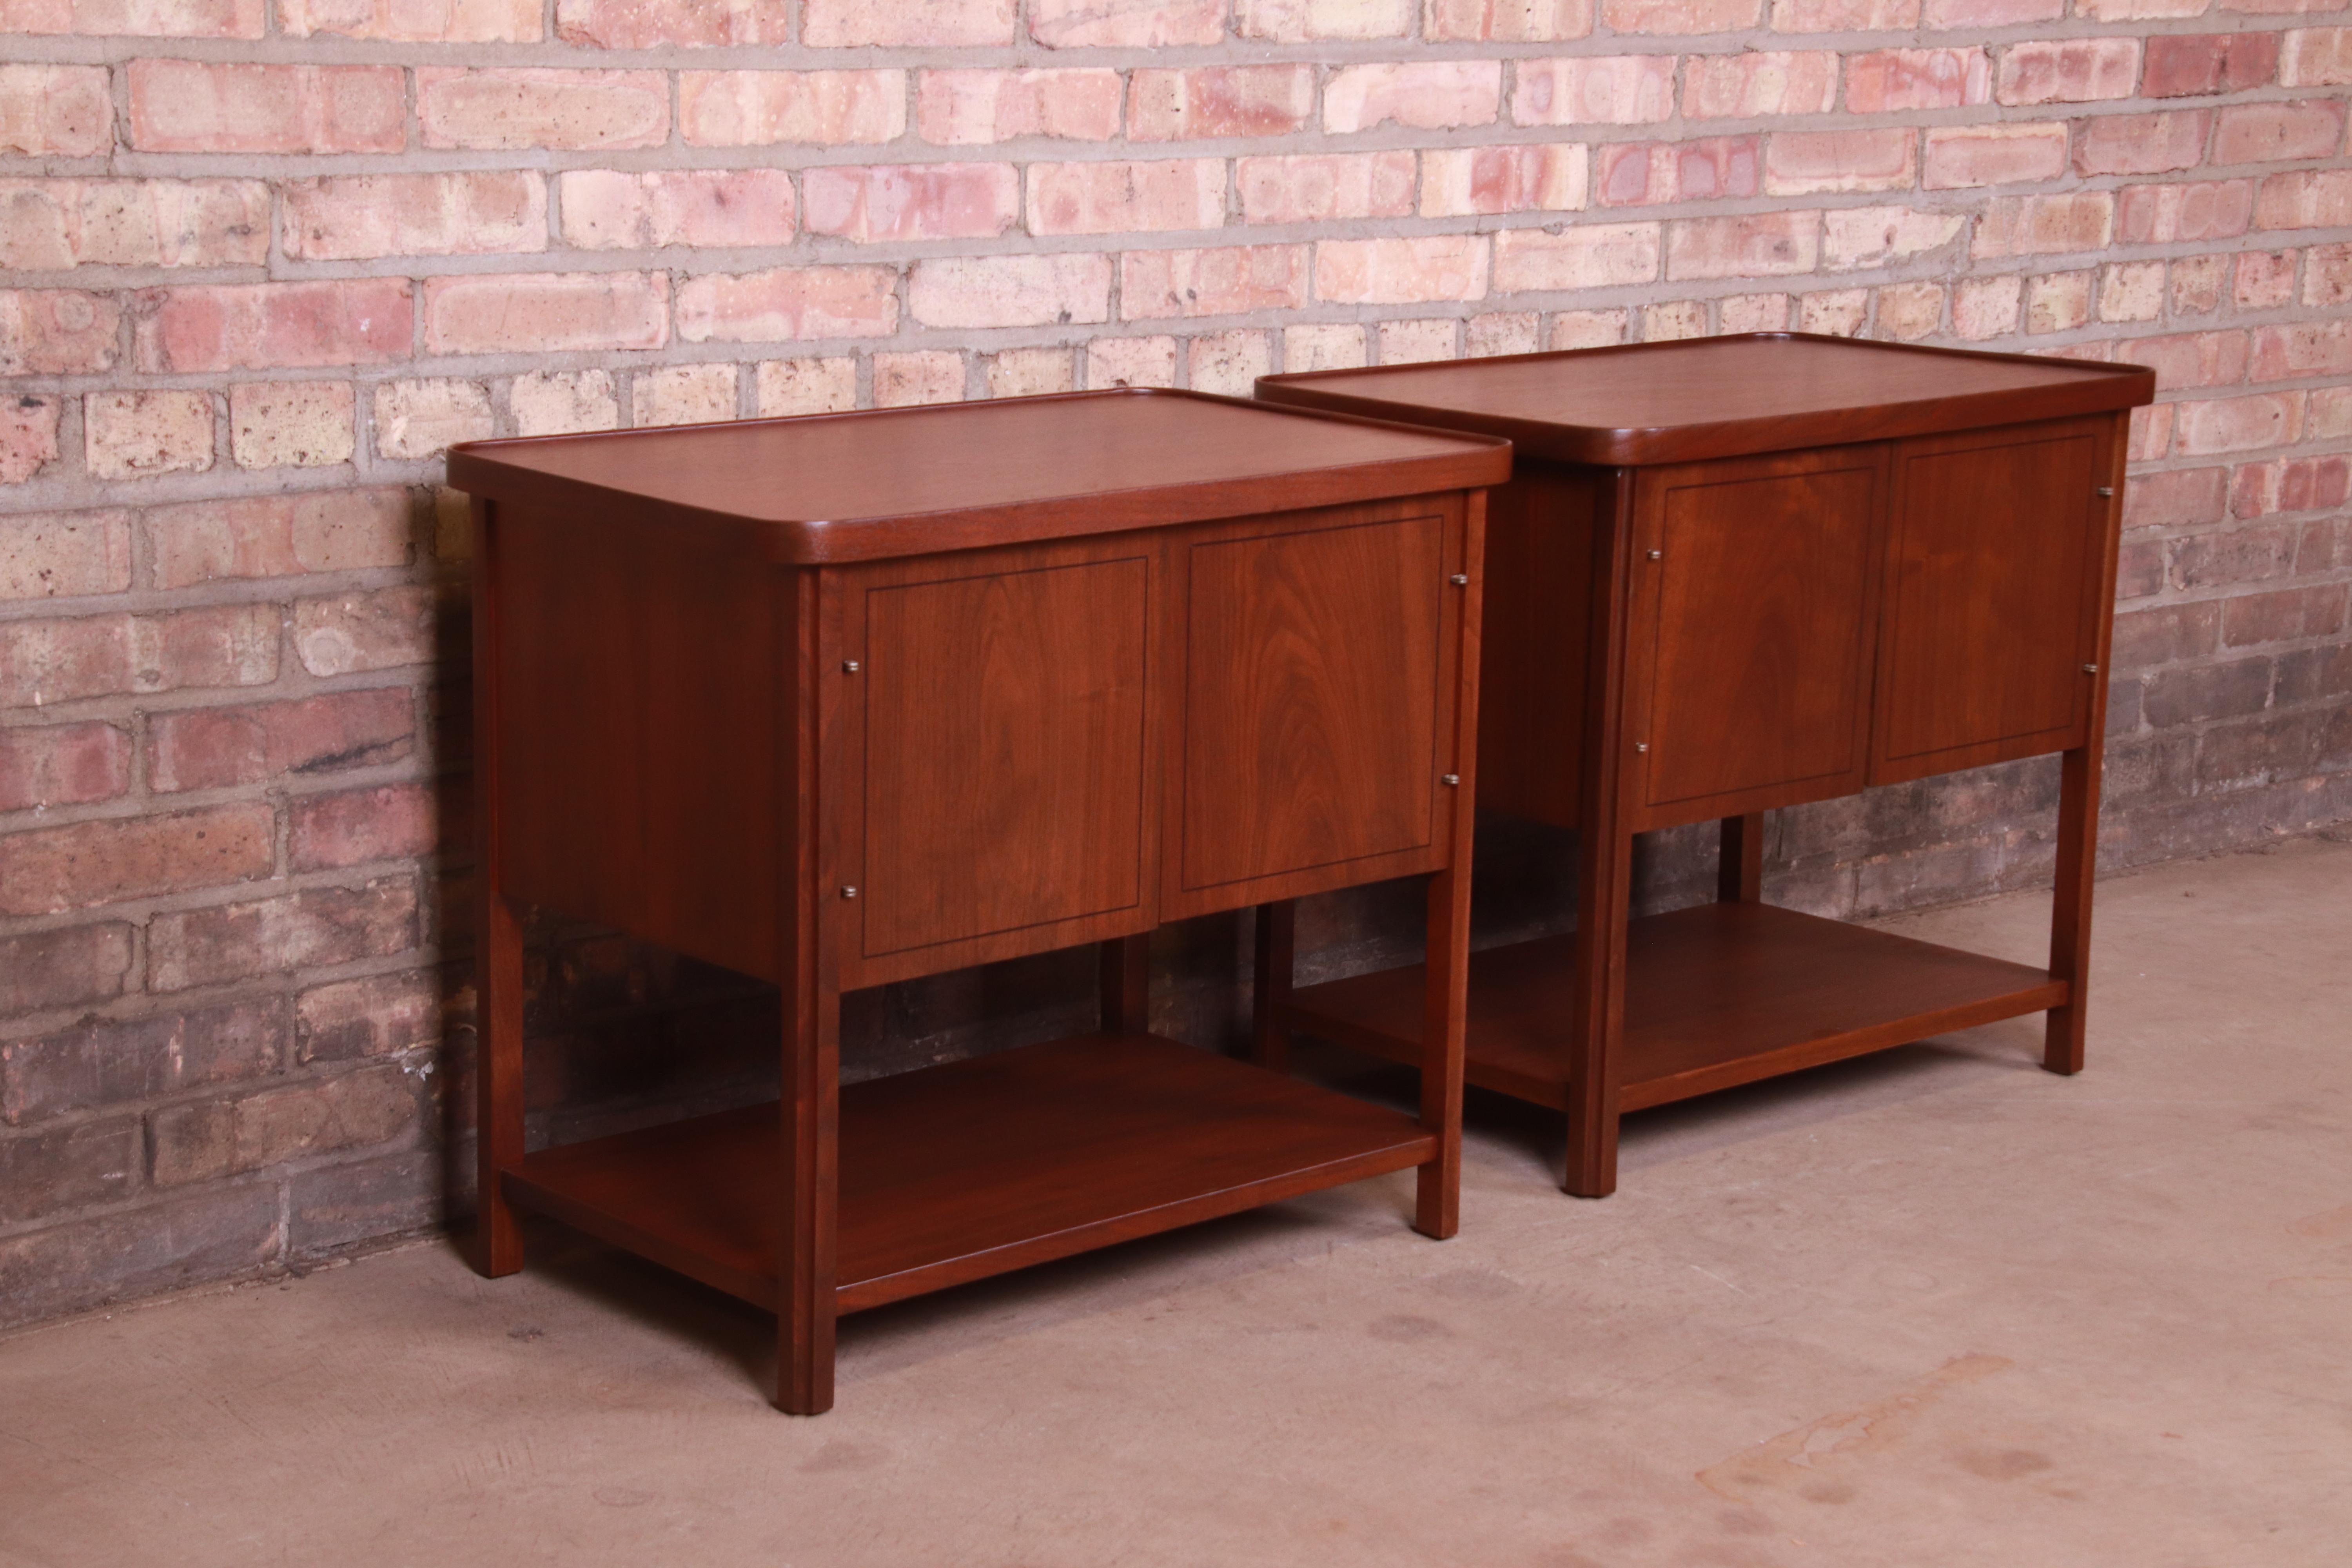 Jack Cartwright for Founders Mid-Century Modern Walnut Nightstands, Refinished 1